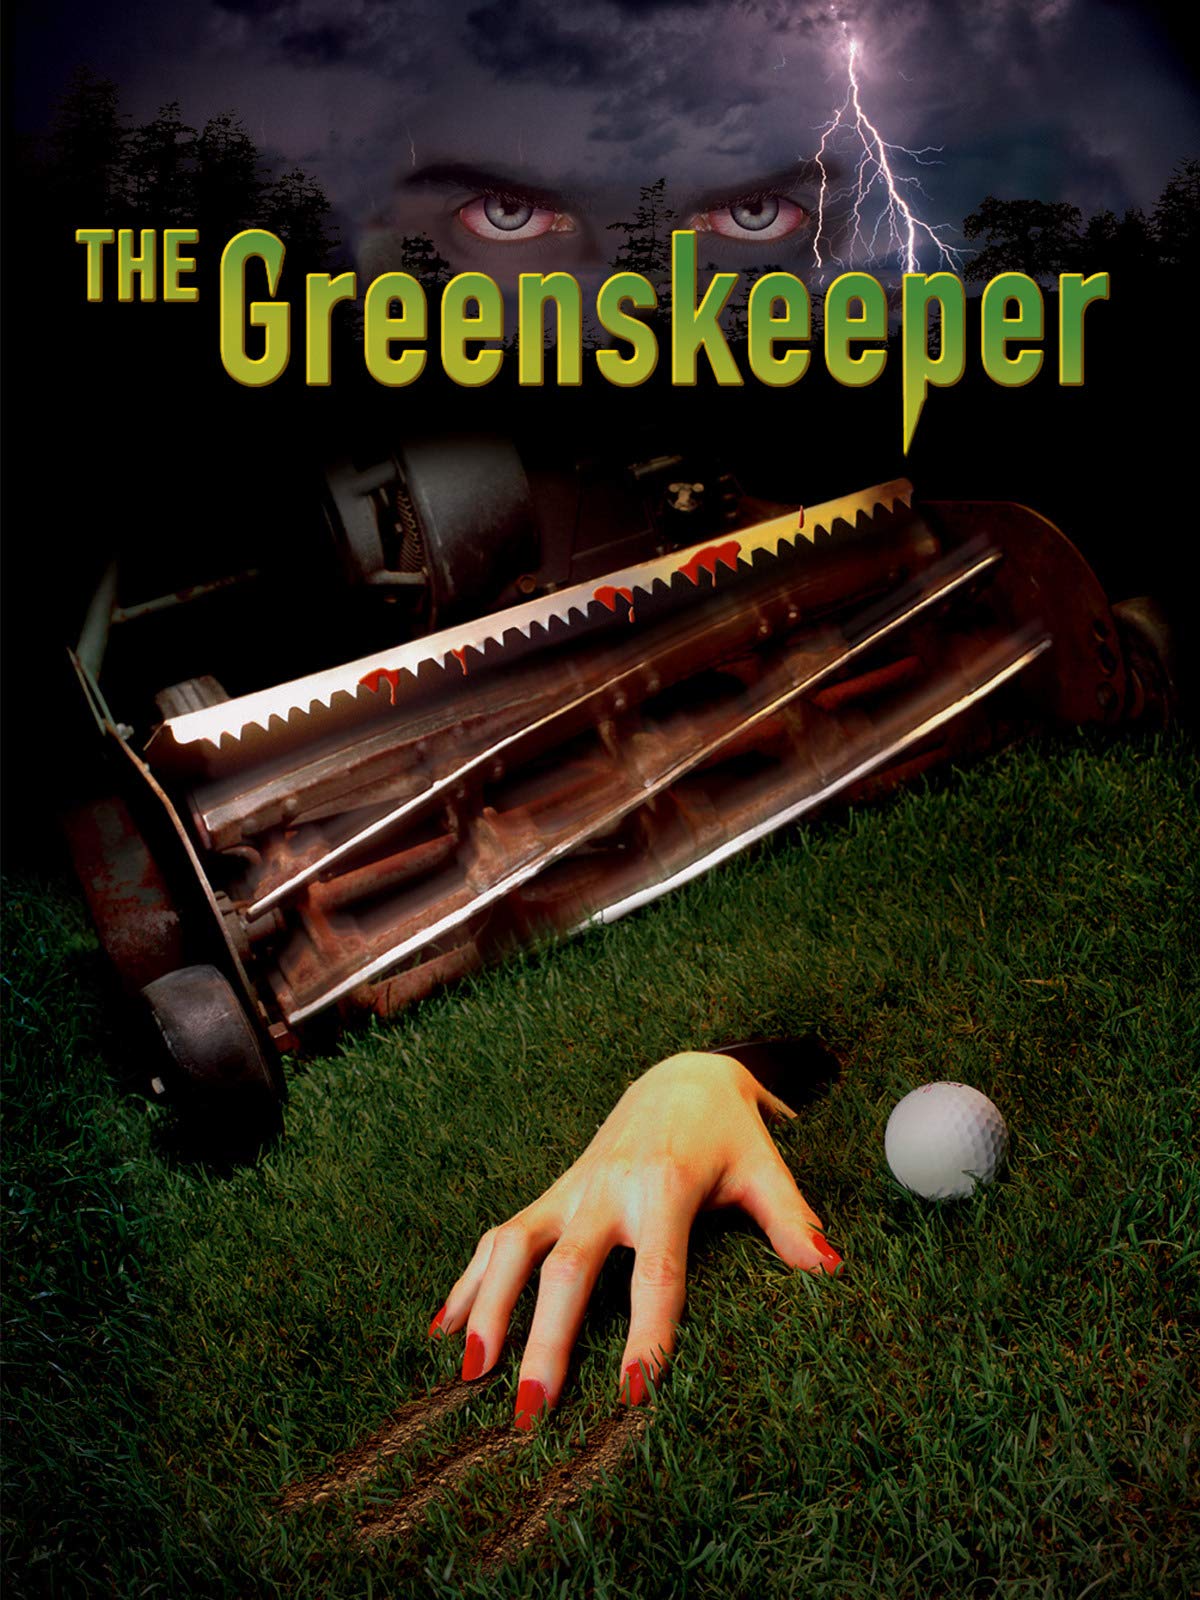 The Greenskeeper (2002) with English Subtitles on DVD on DVD